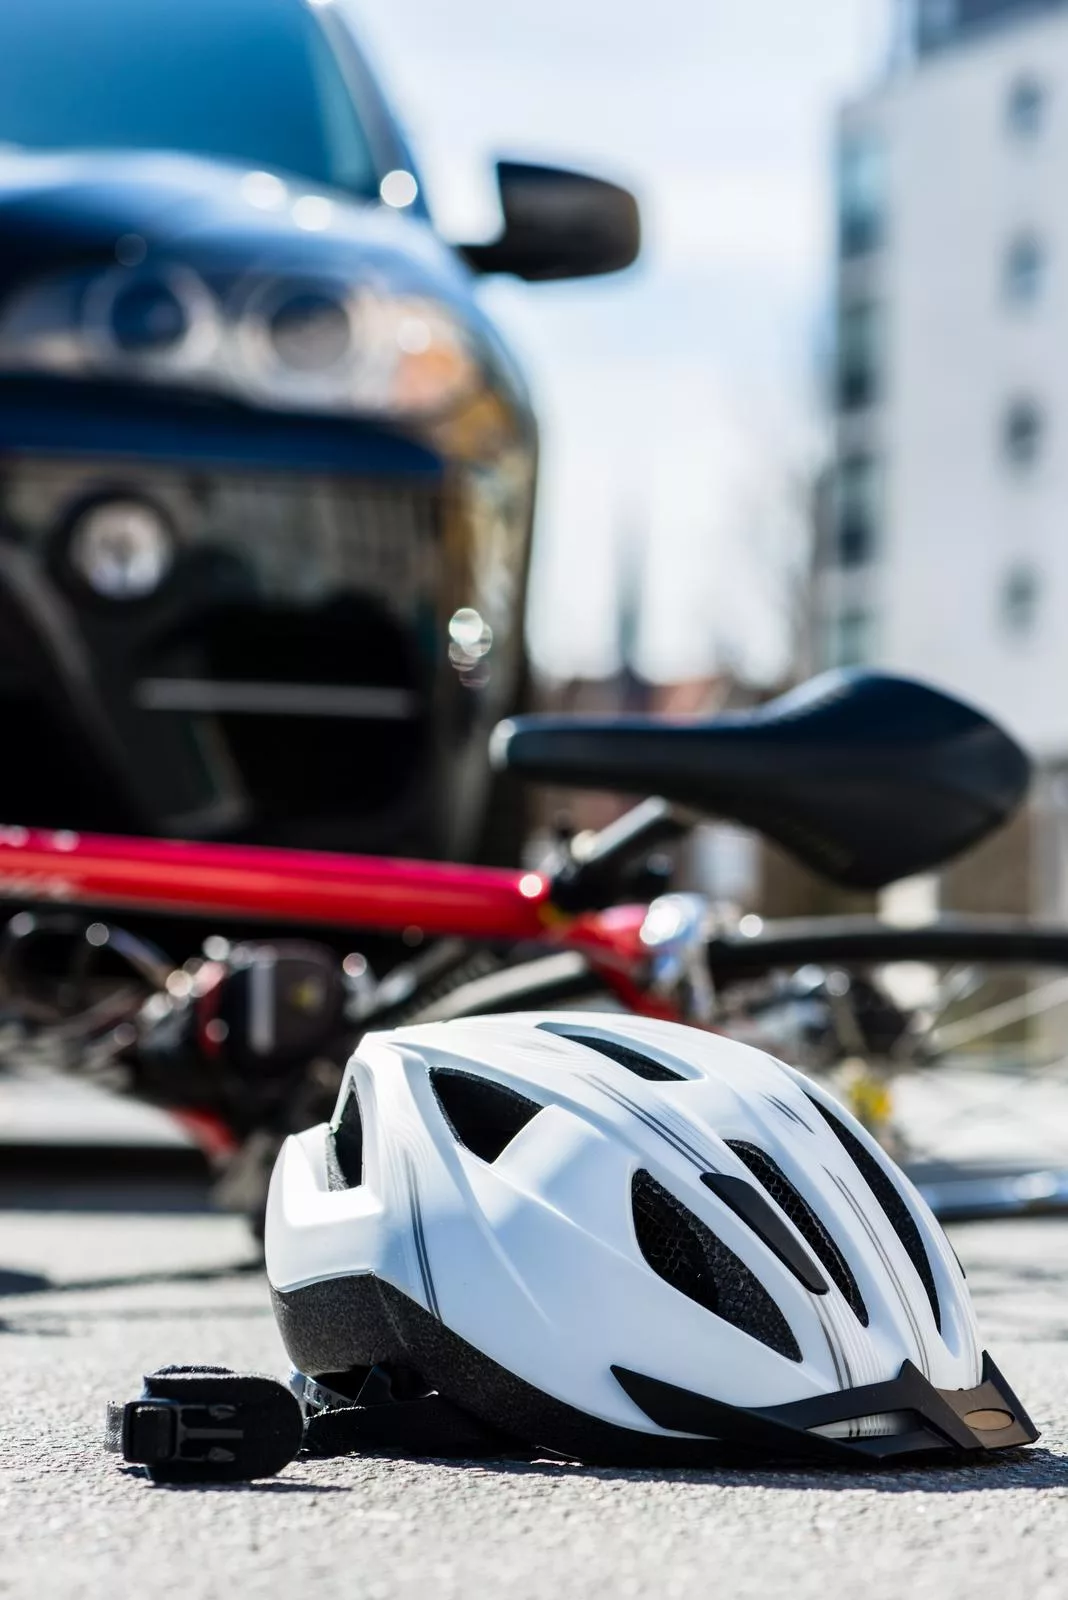 Ft Lauderdale Bicycle Accident Law Firm